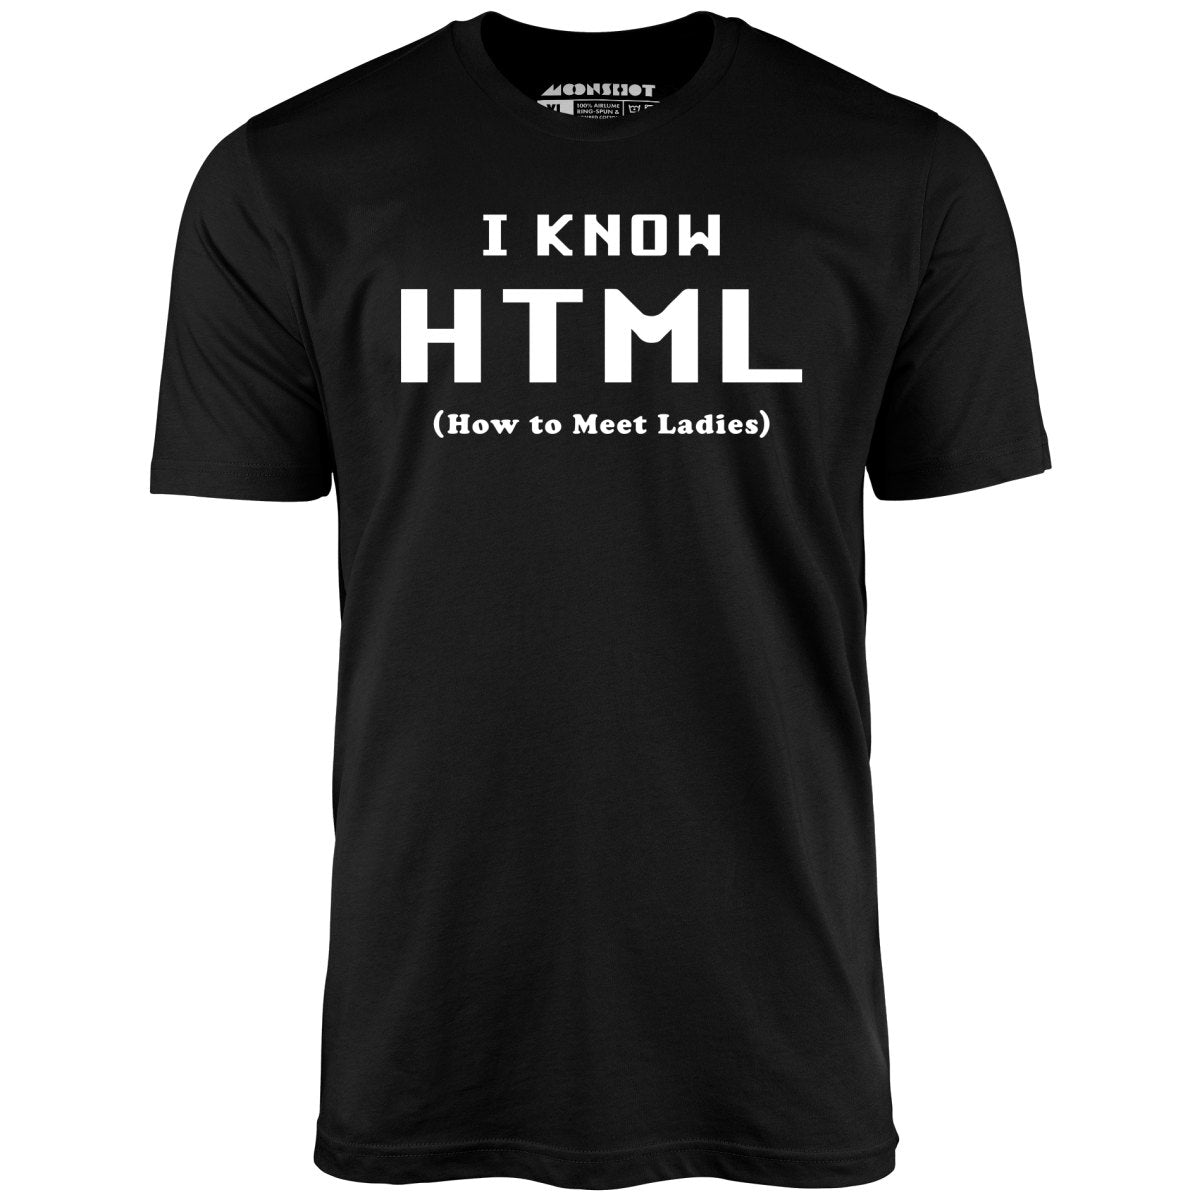 I Know HTML - How to Meet Ladies - Unisex T-Shirt